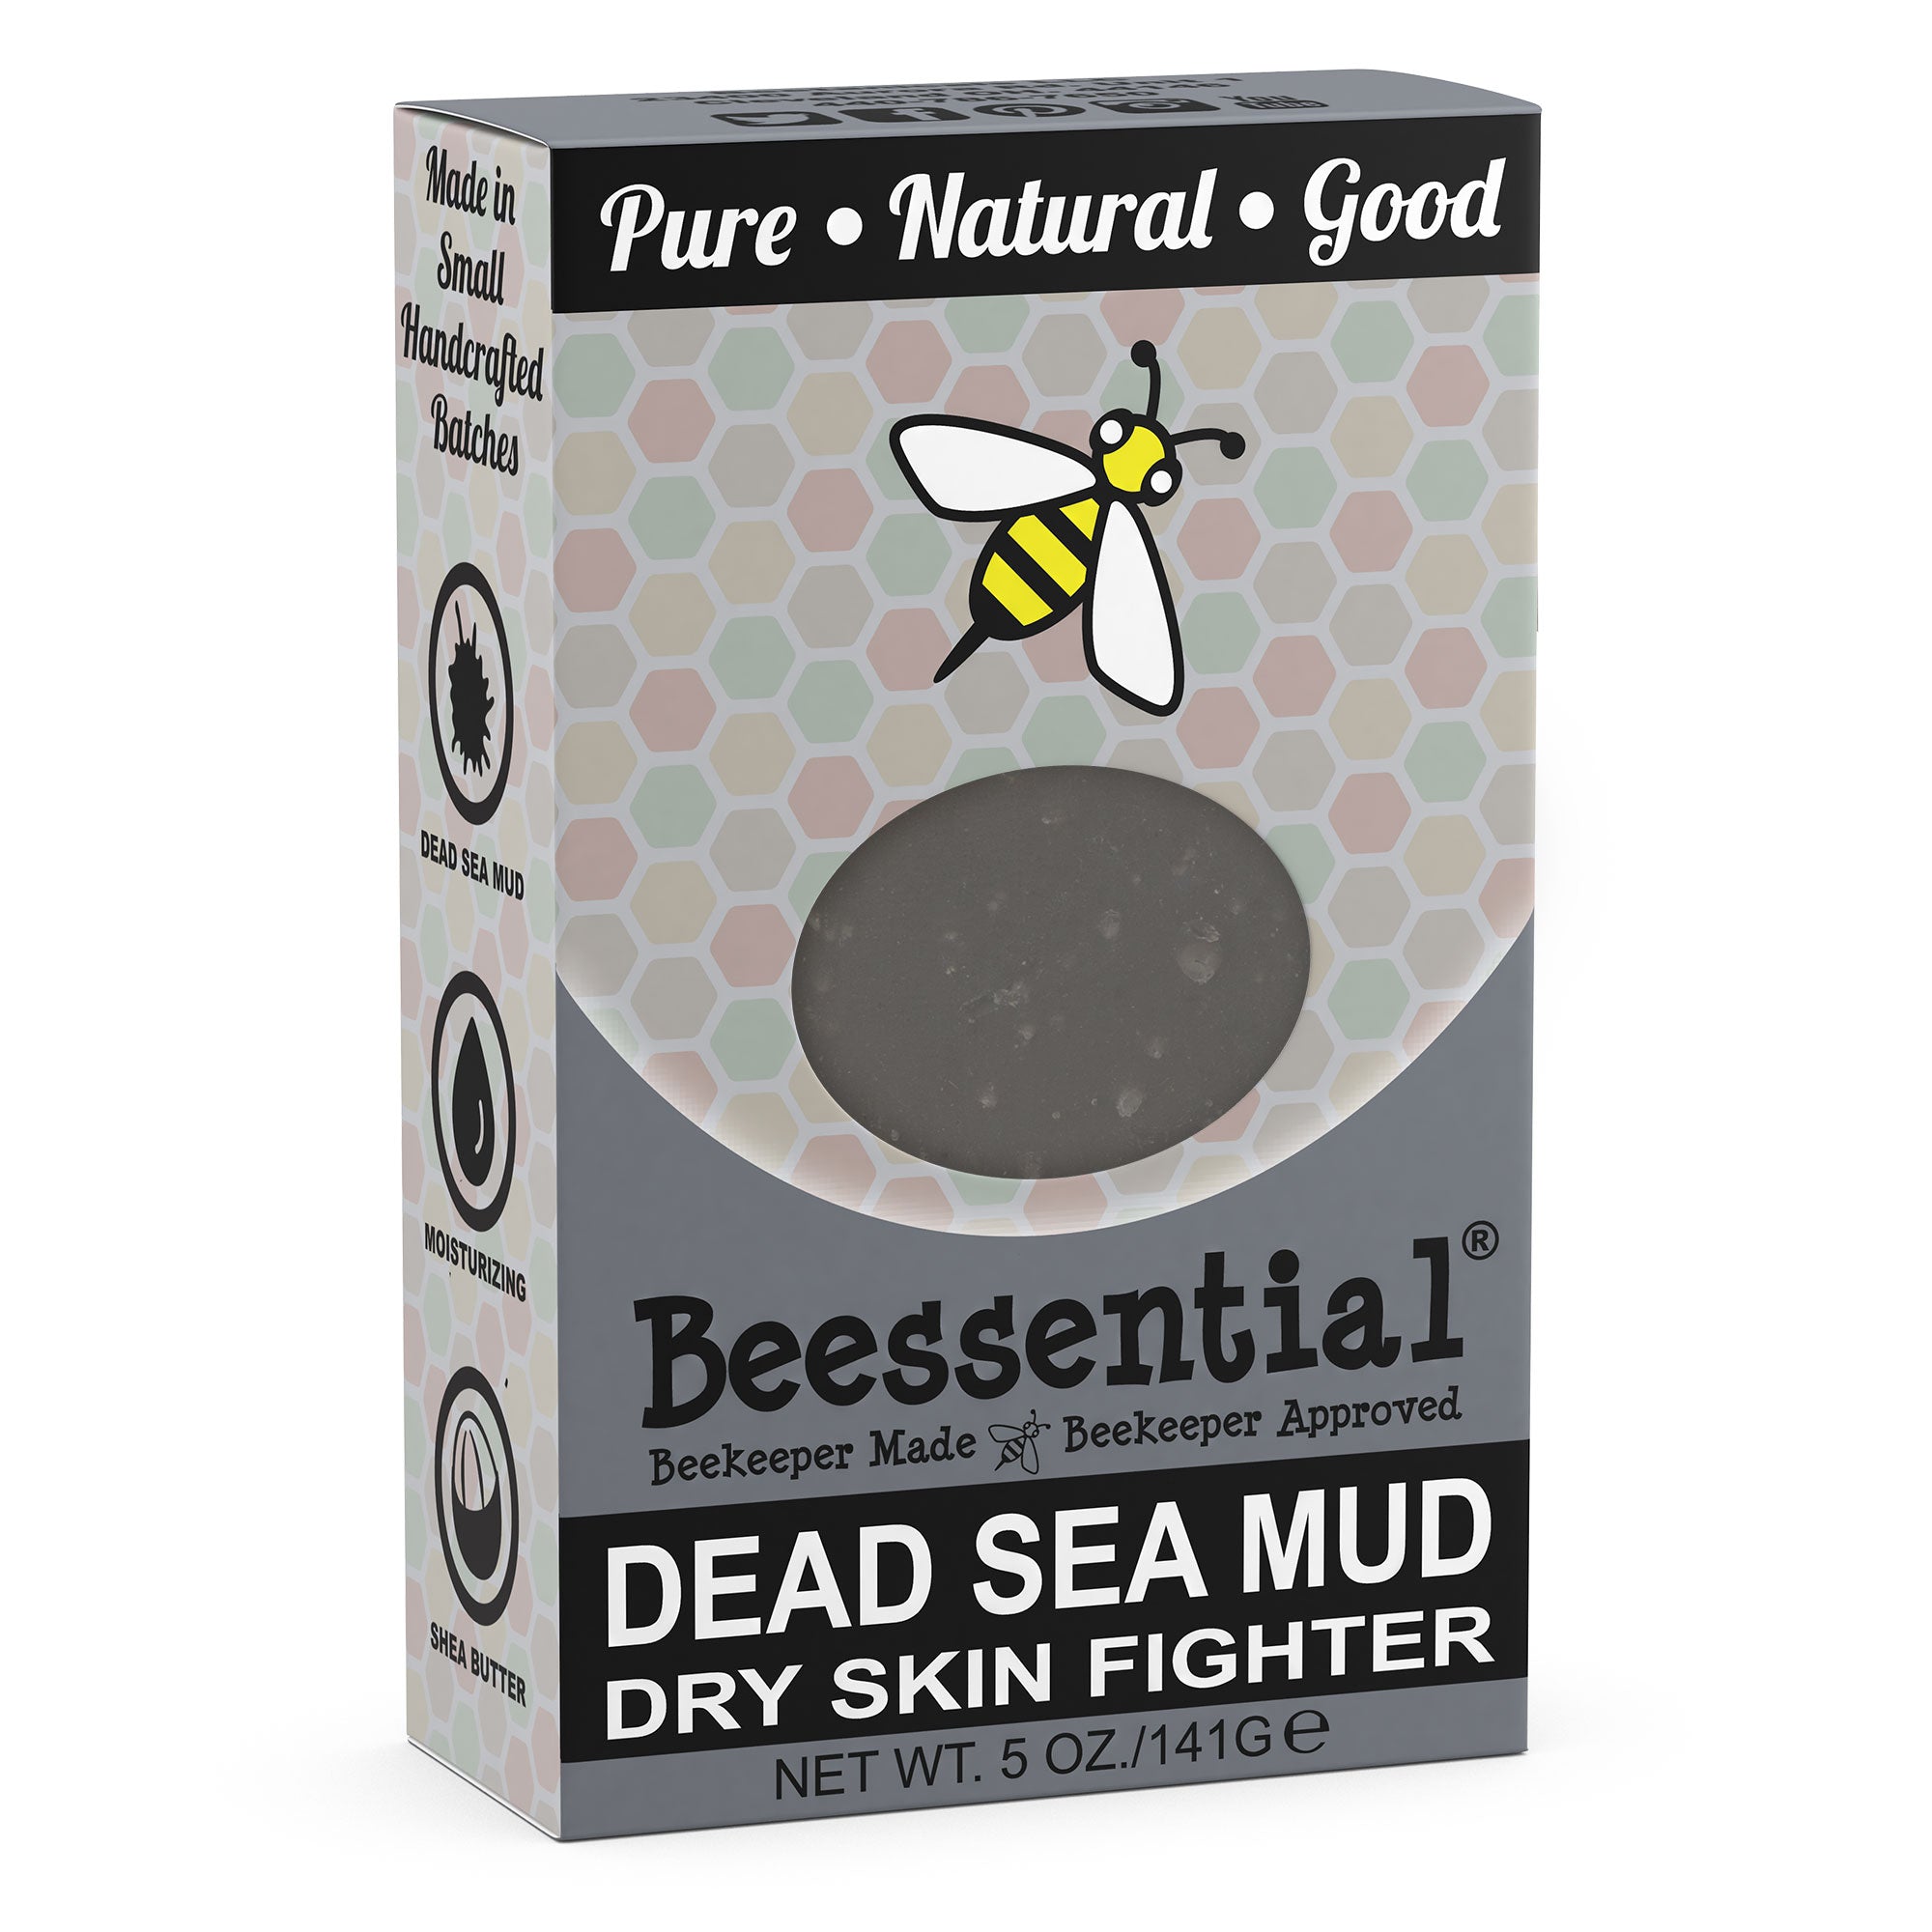 Beessential Dead Sea Mud Mineral rich, deloxying bar soap.